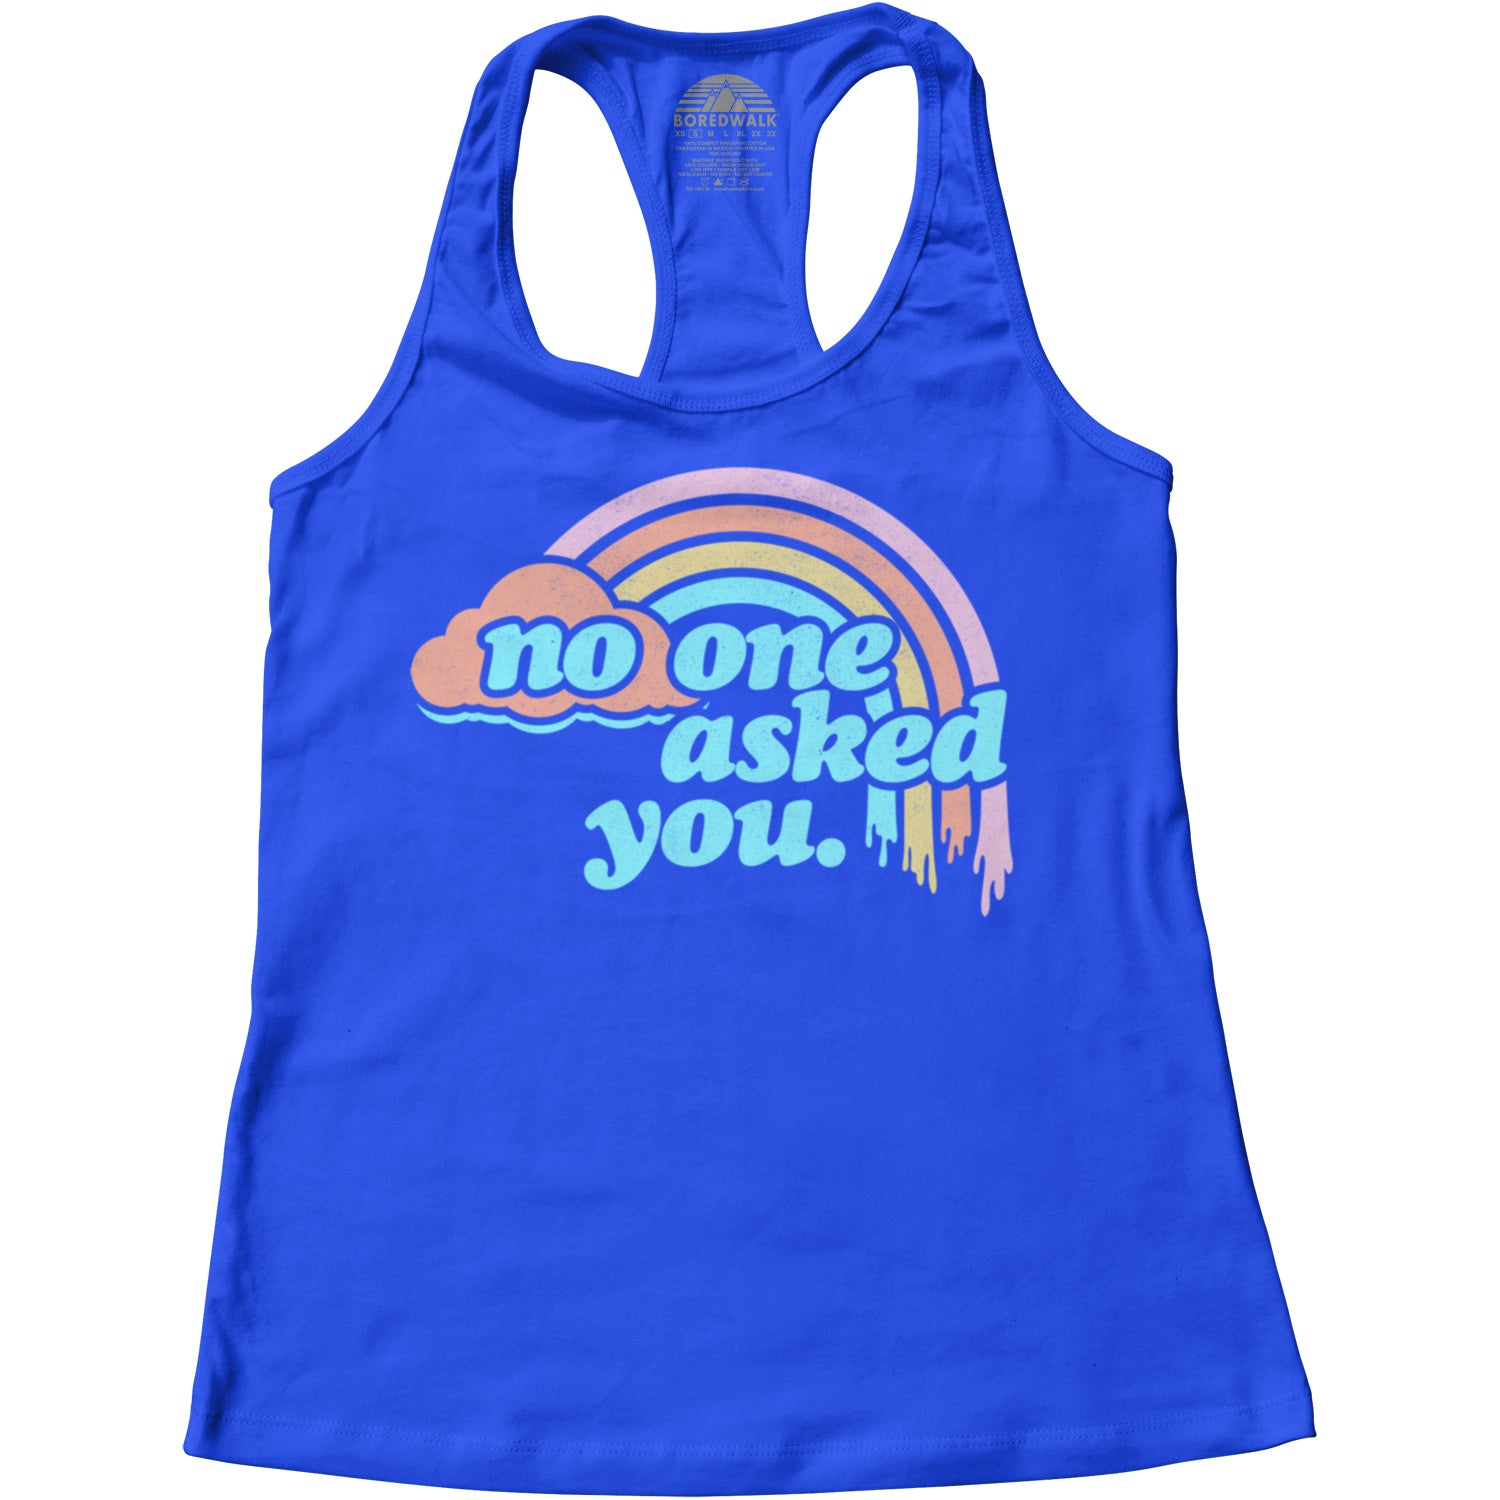 Women's No One Asked You Racerback Tank Top